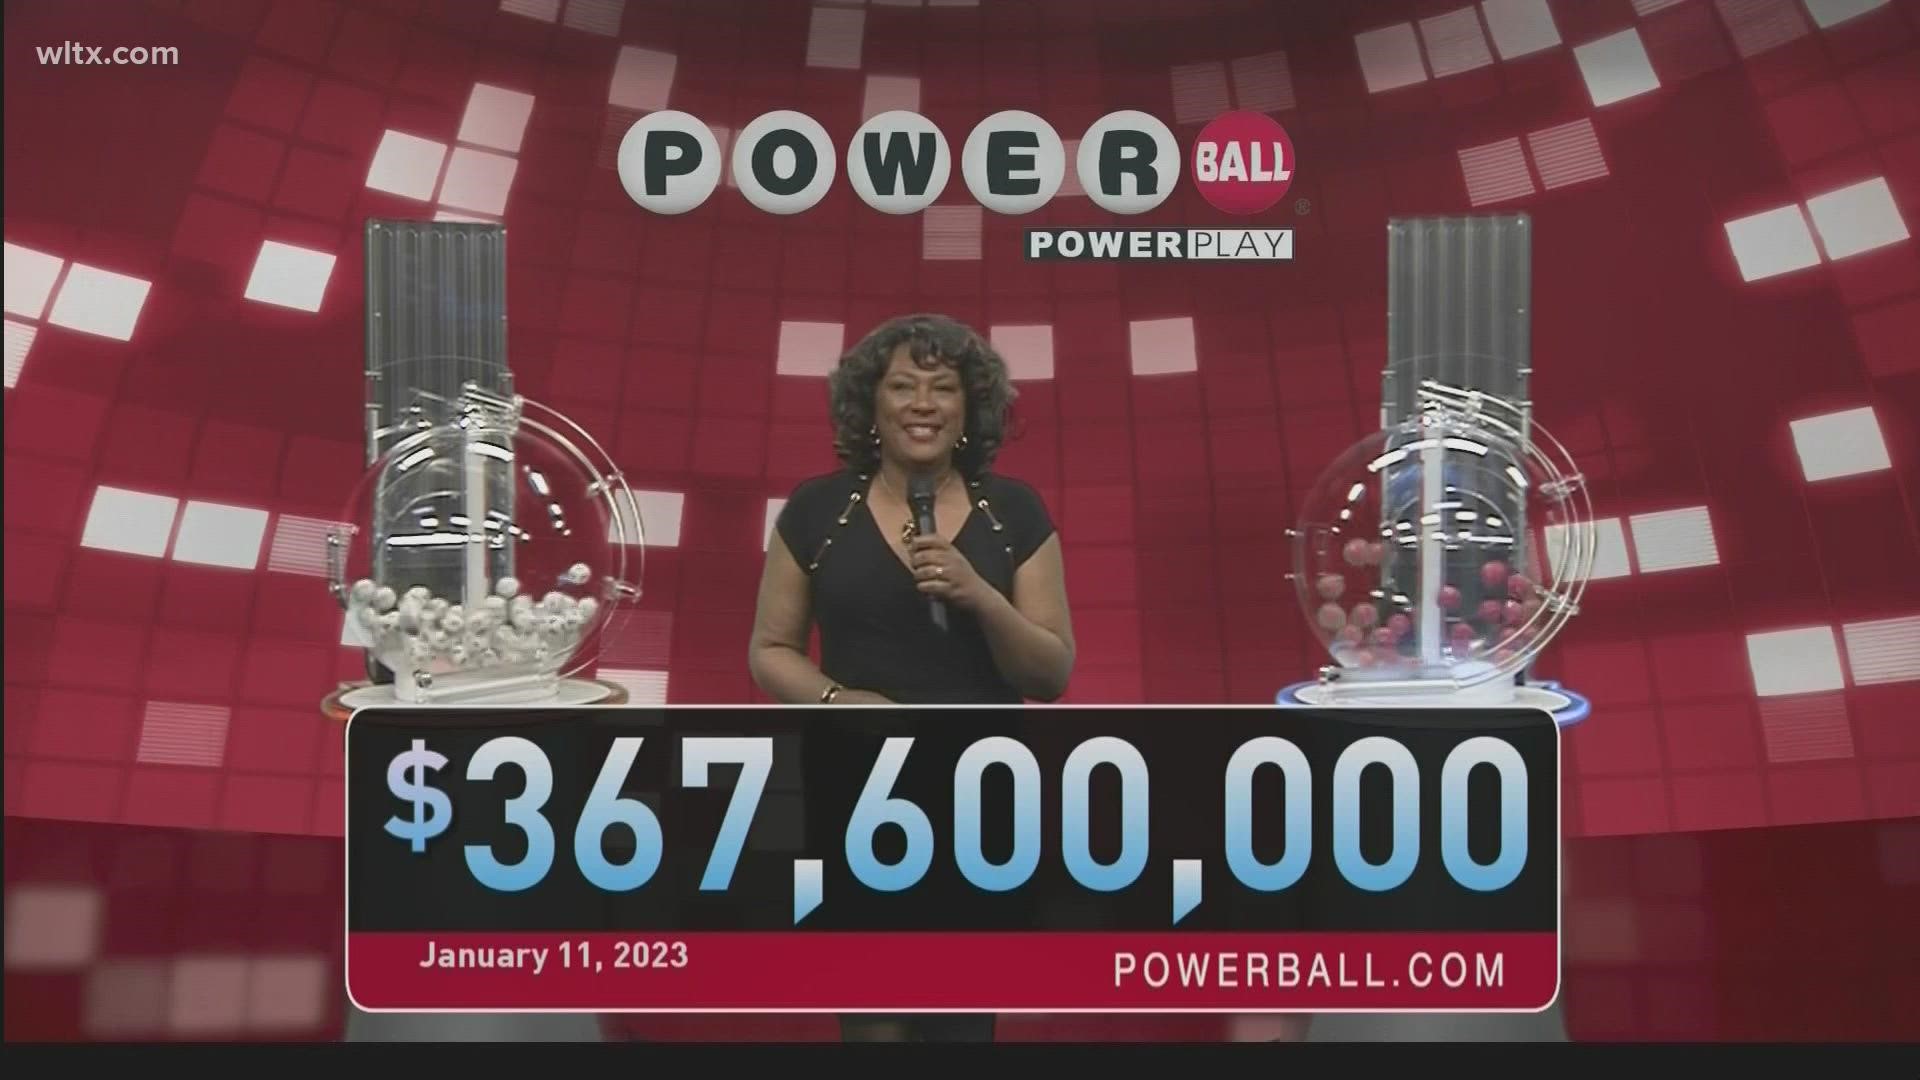 Here are the winning Powerball numbers for Wednesday, January 11, 2023.